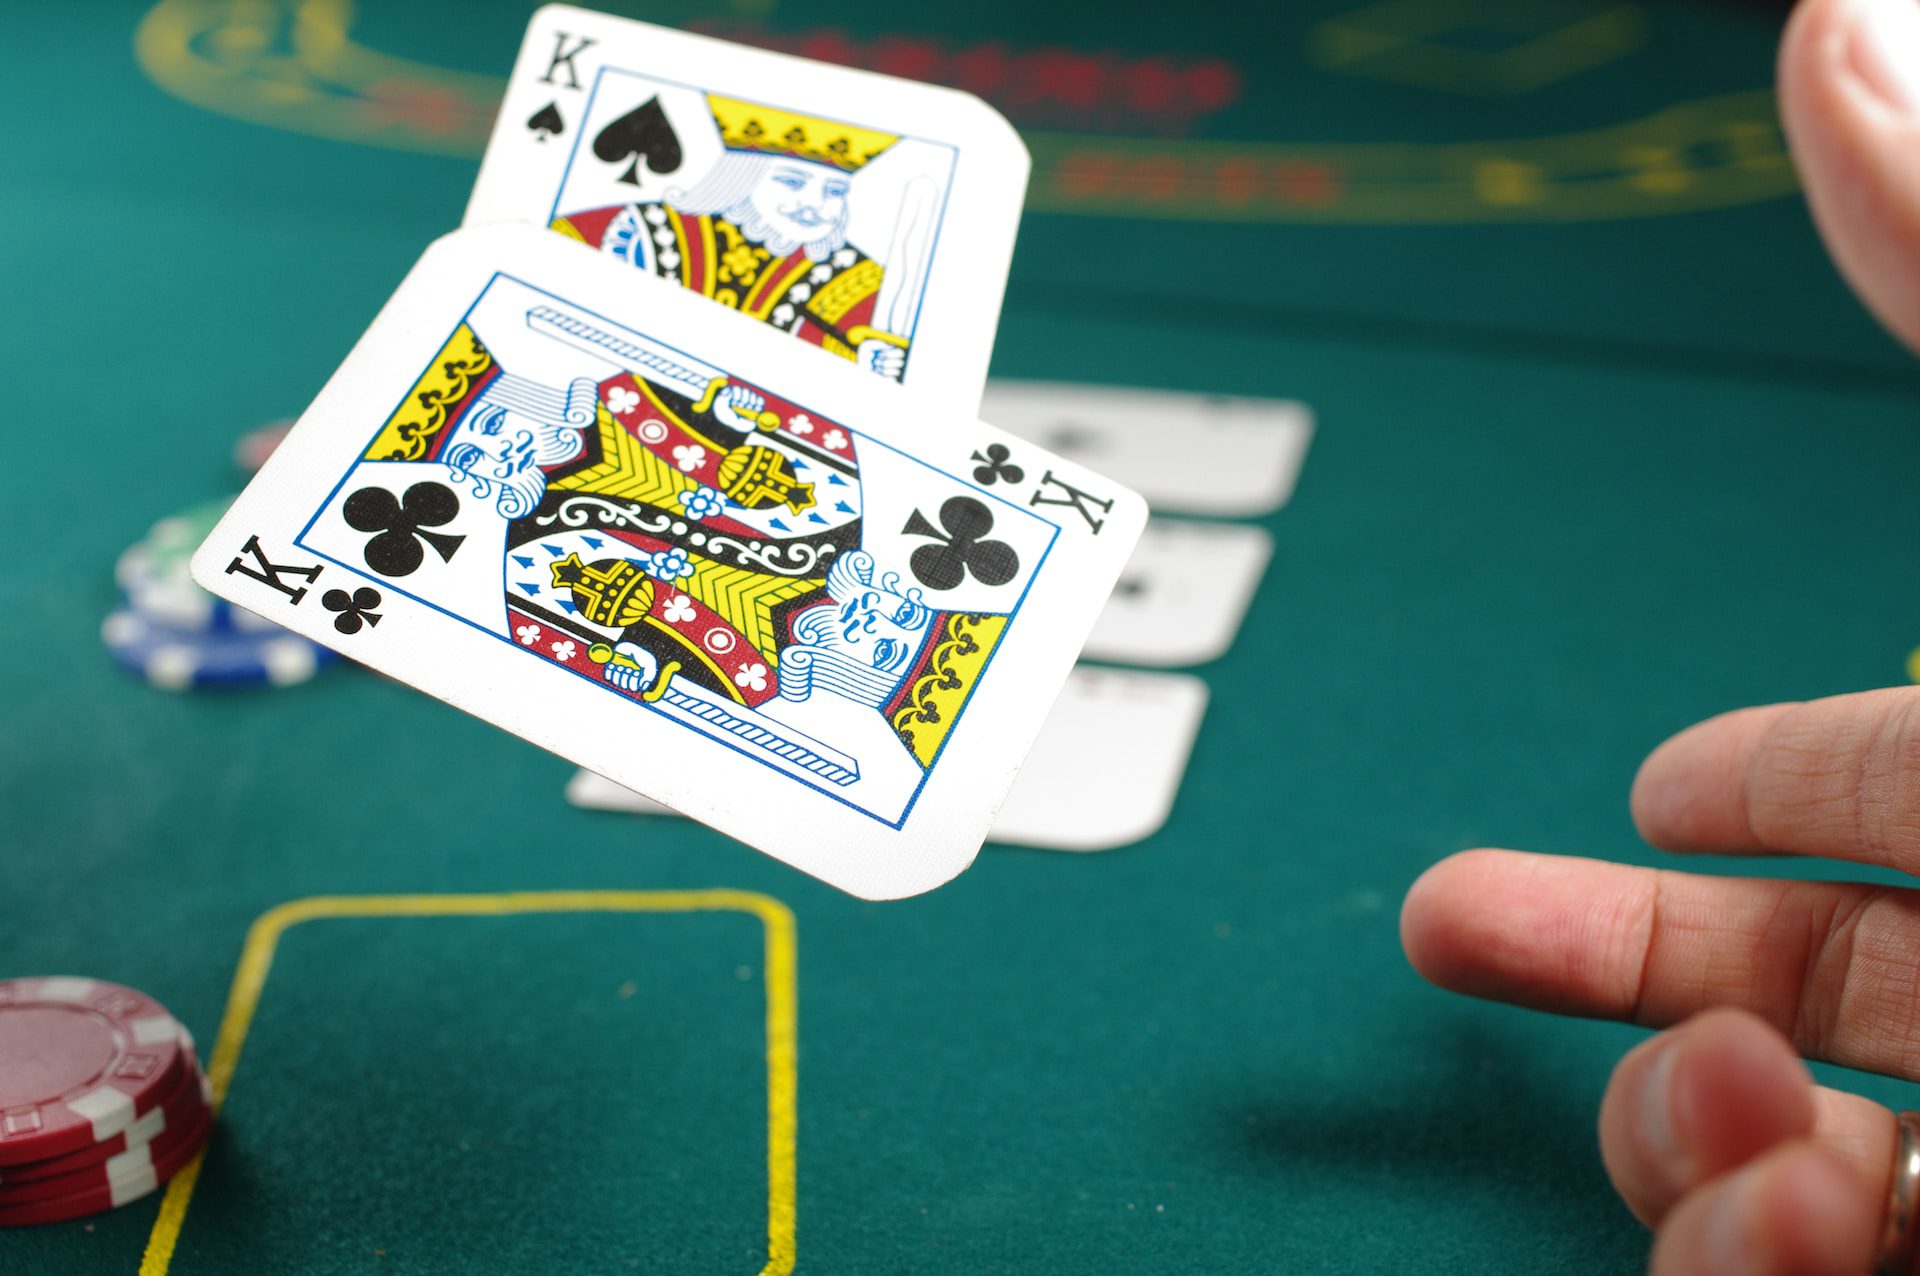 How to create an online course casino website